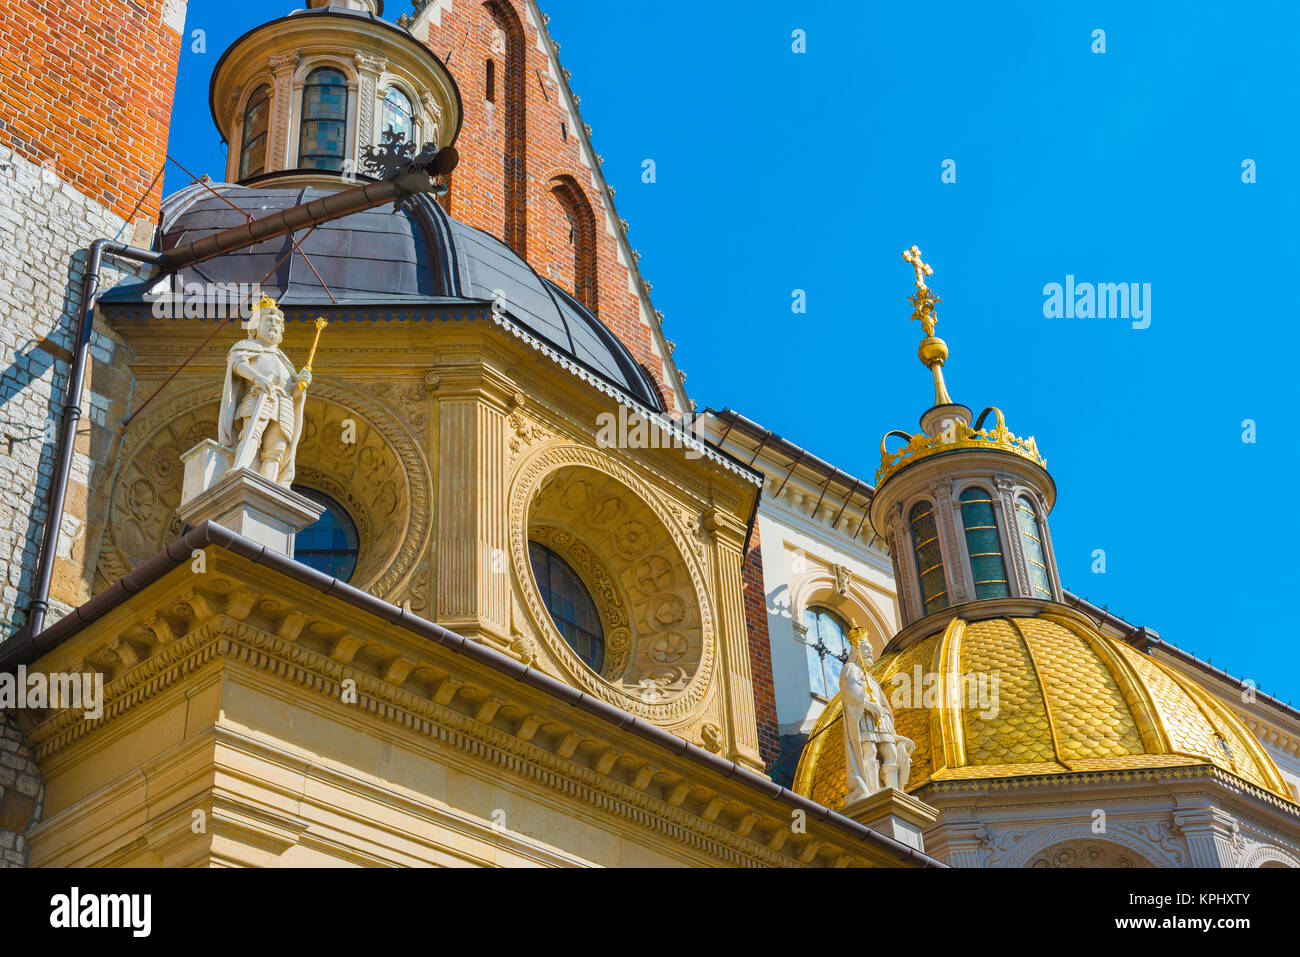 Poland medieval architecture, detail of the exterior of the Cathedral in Krakow, Poland. Stock Photo